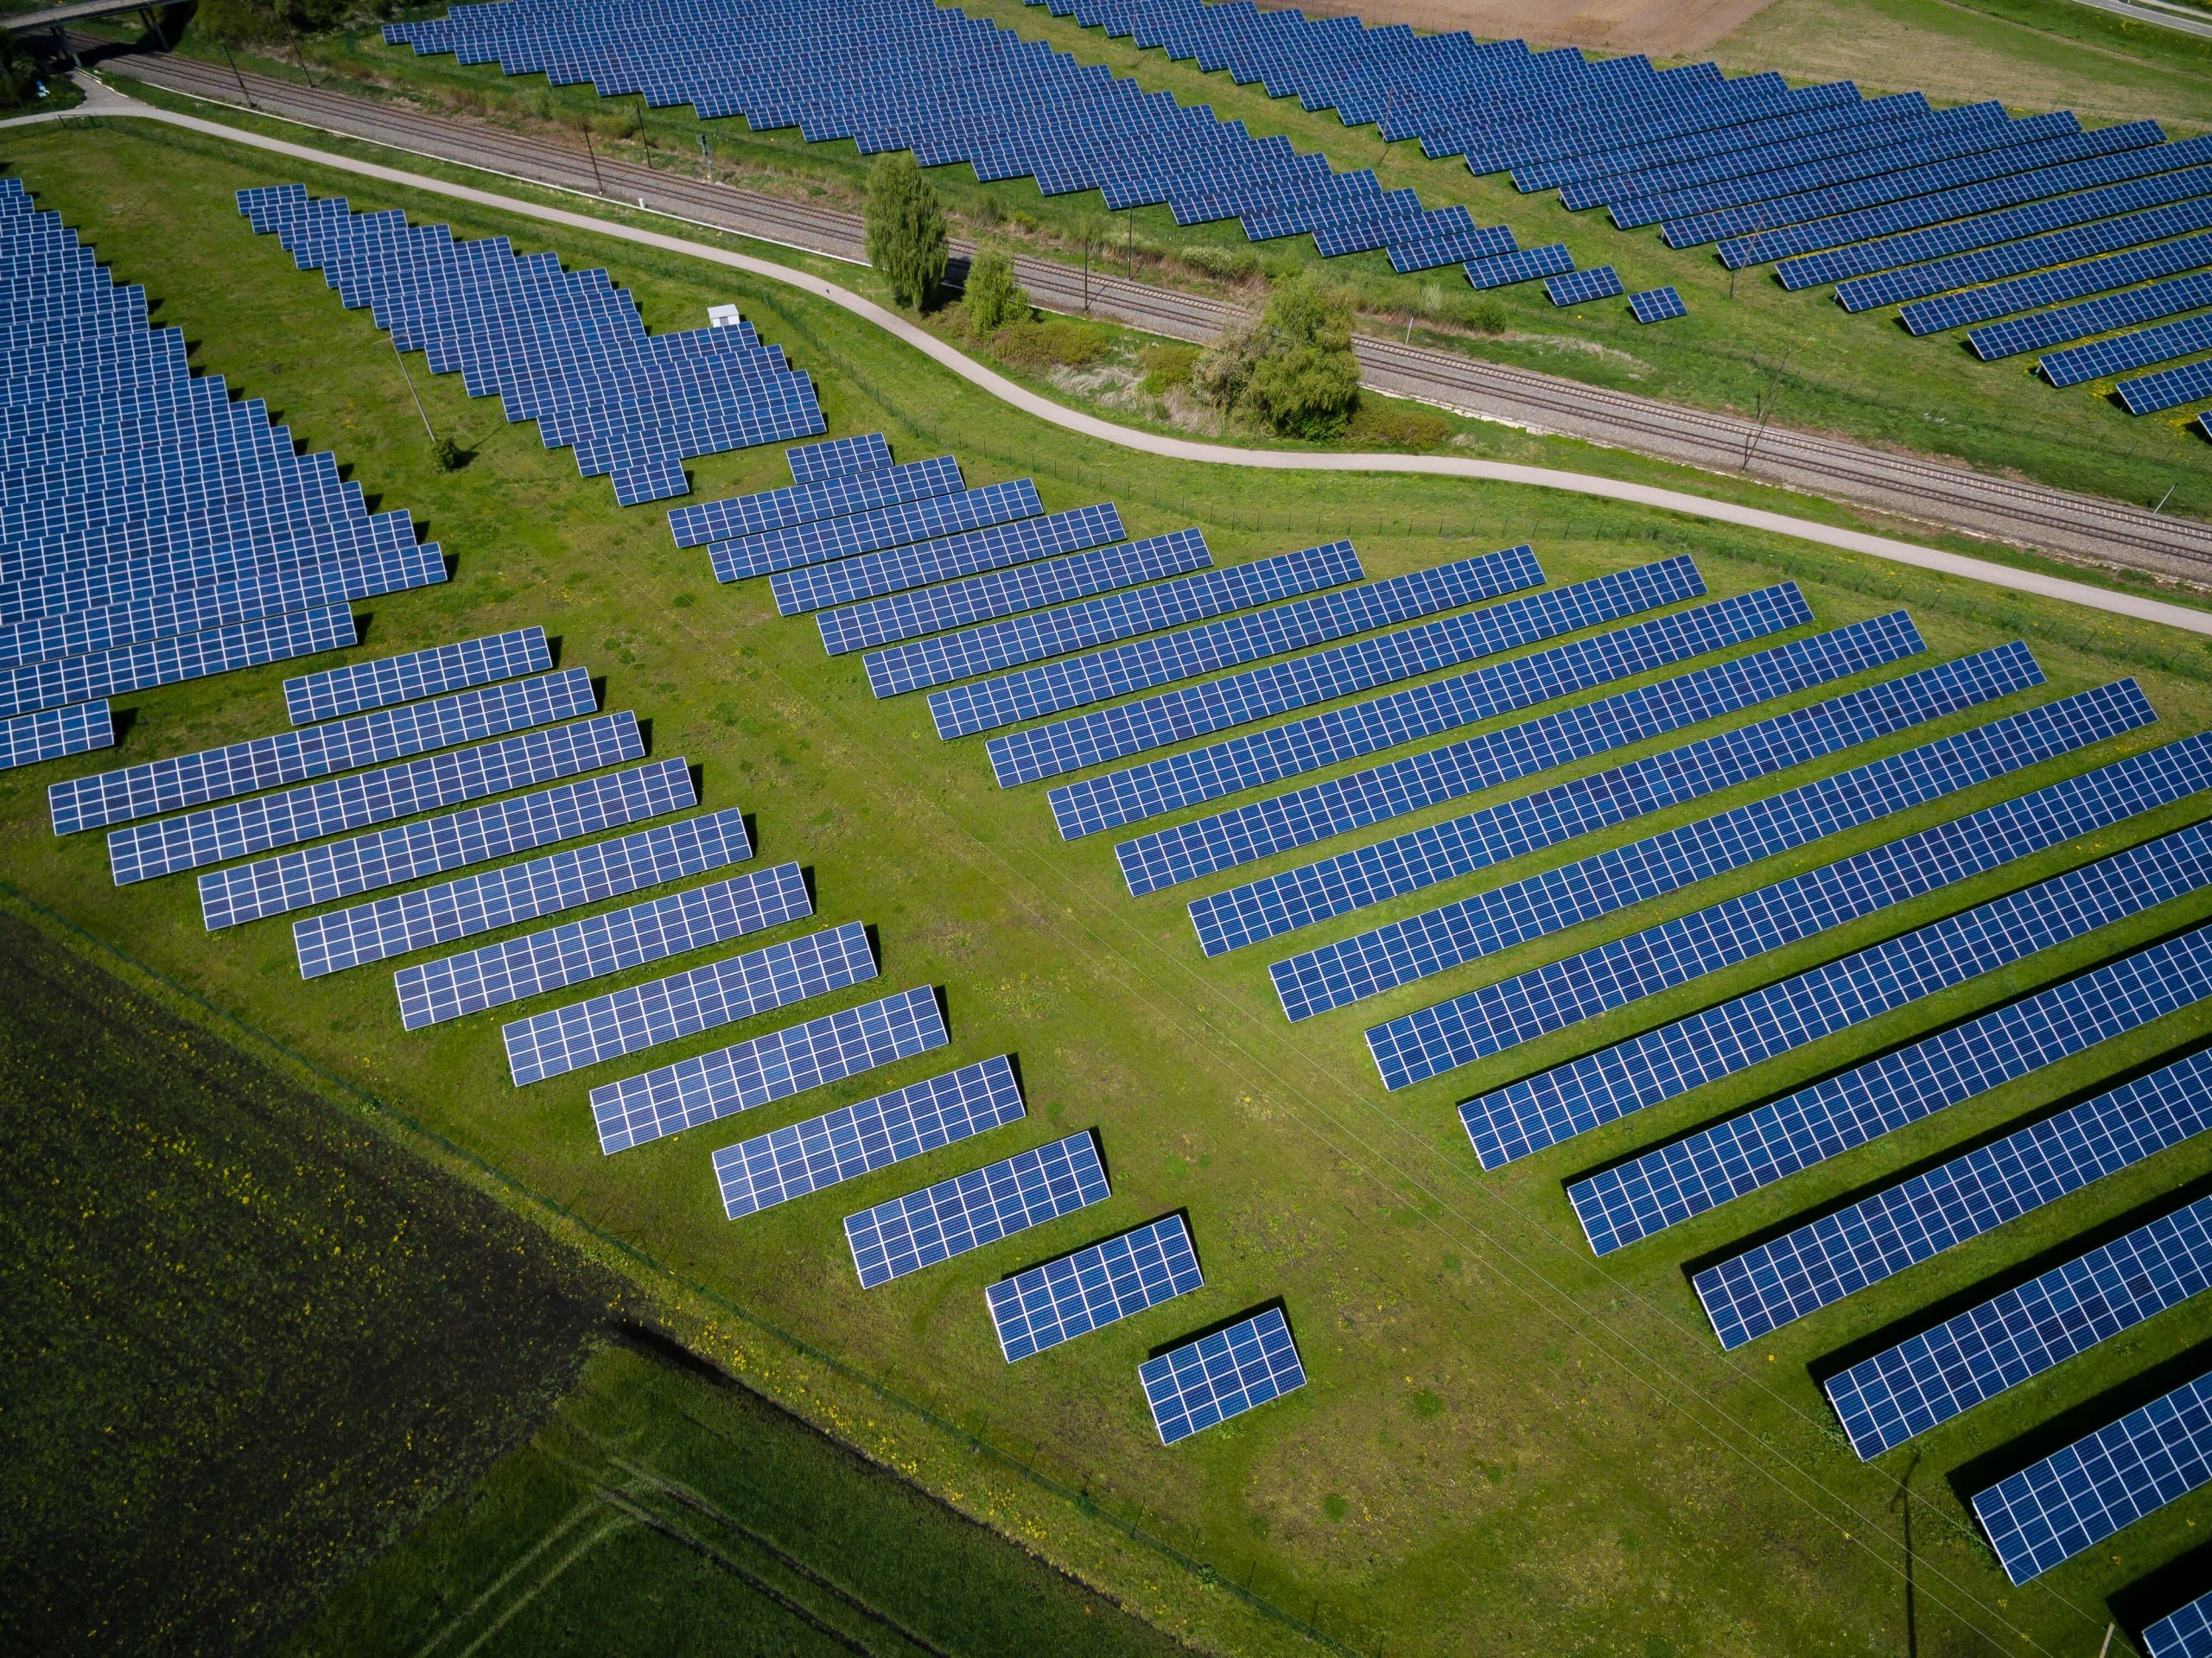 Solar Energy News – What’s New in the Solar Energy Field?